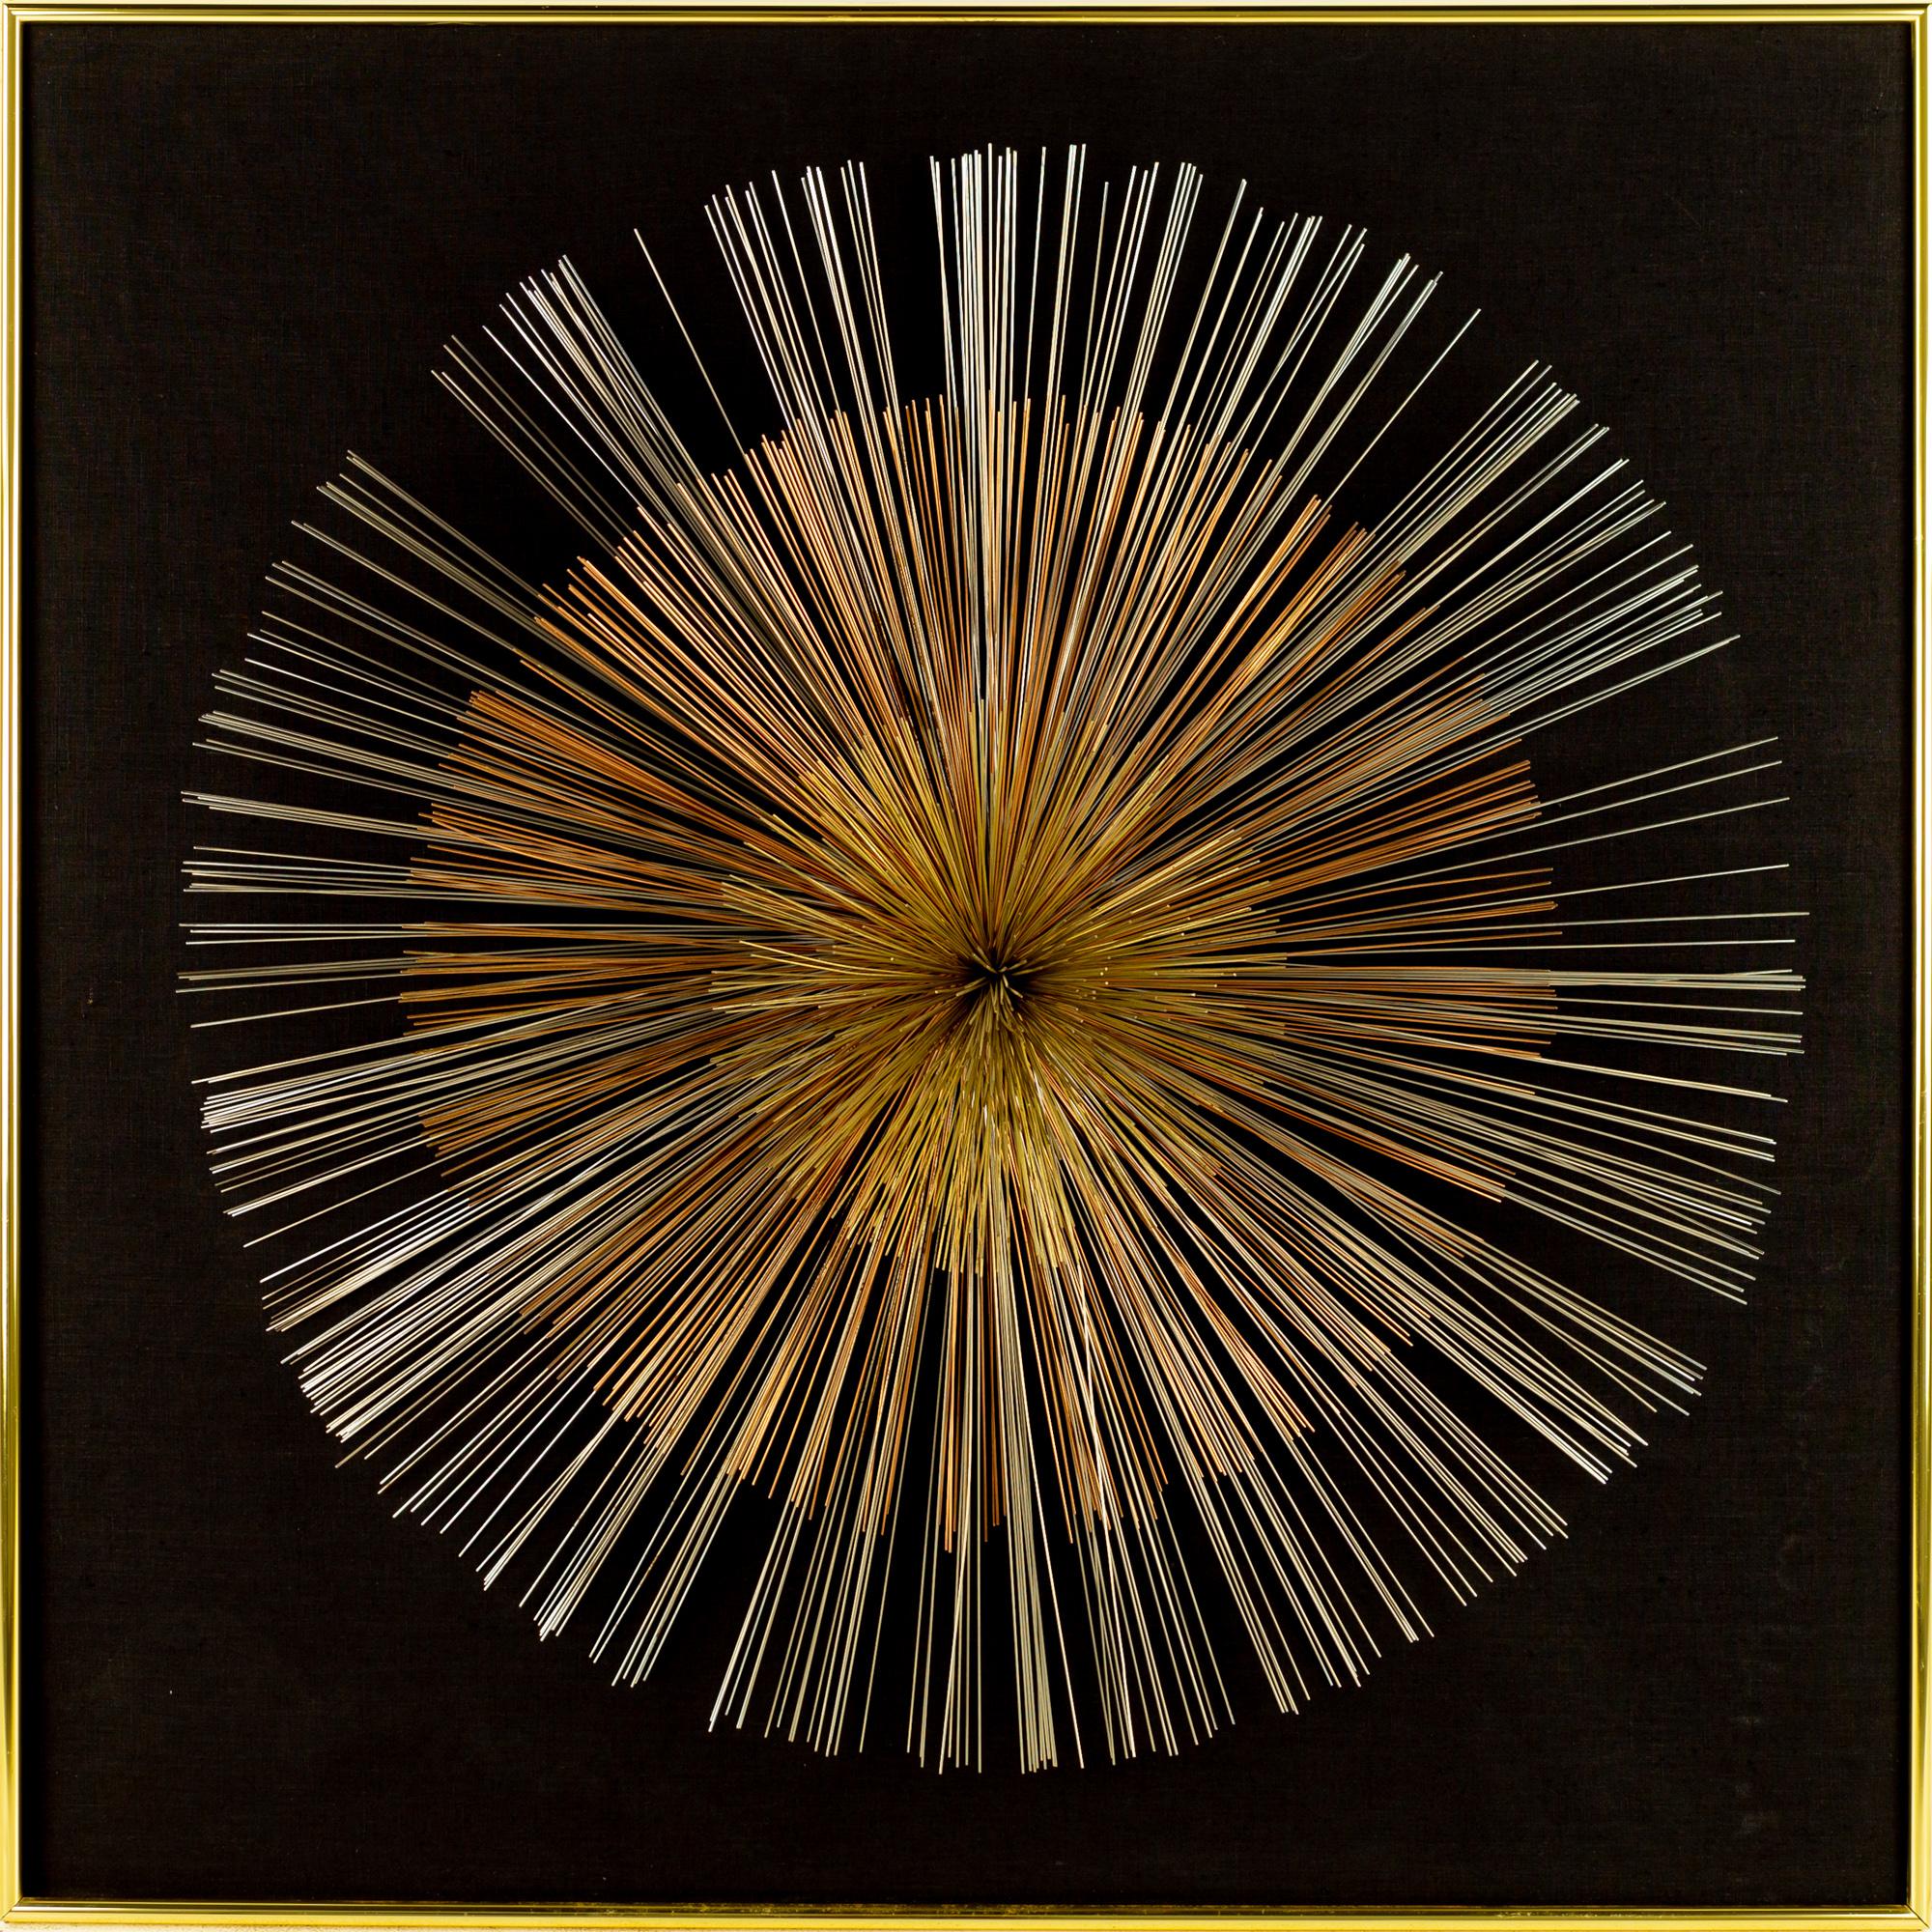 Curtis Jere sunburst pom mixed metal wire mid century wall sculpture

This piece measures: 49 wide x 13.25 deep x 48.75 inches high

This sculpture is in great vintage condition.

Each piece is carefully cleaned and packaged before being